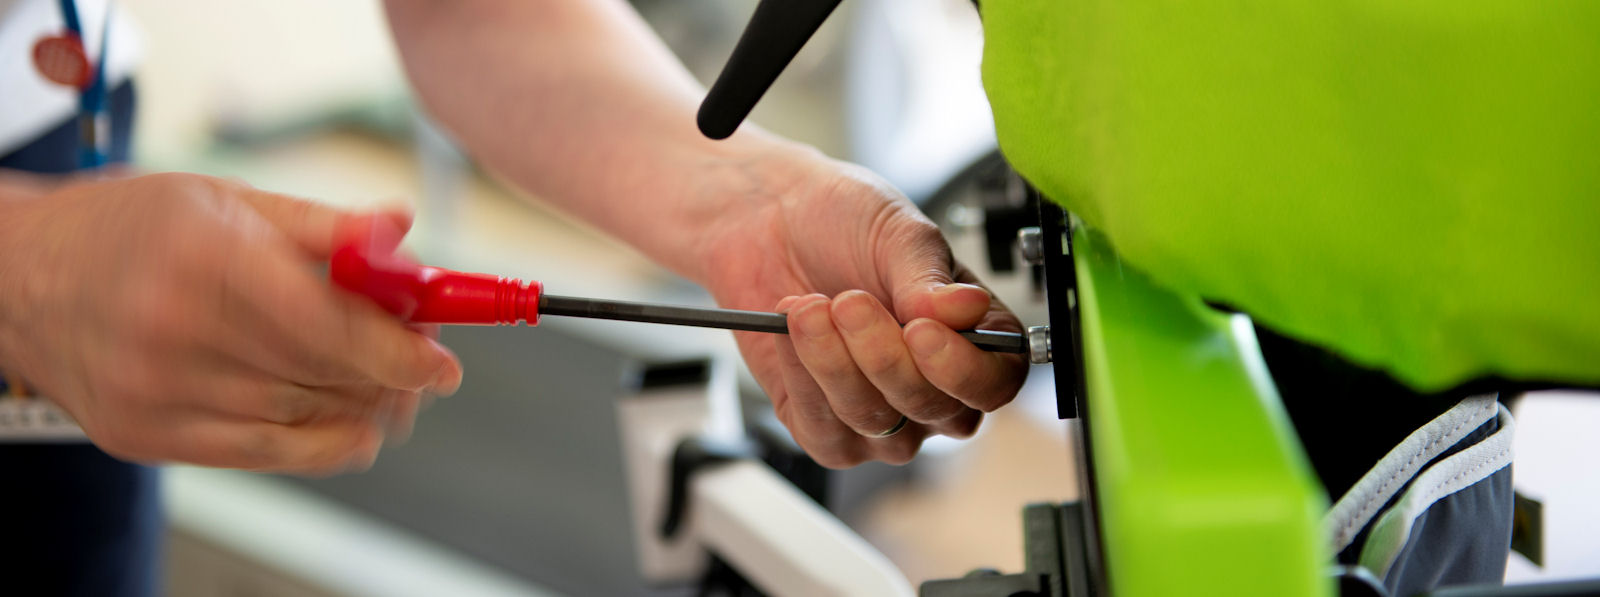 Close up of hands adjusting a piece of equipment with a tool